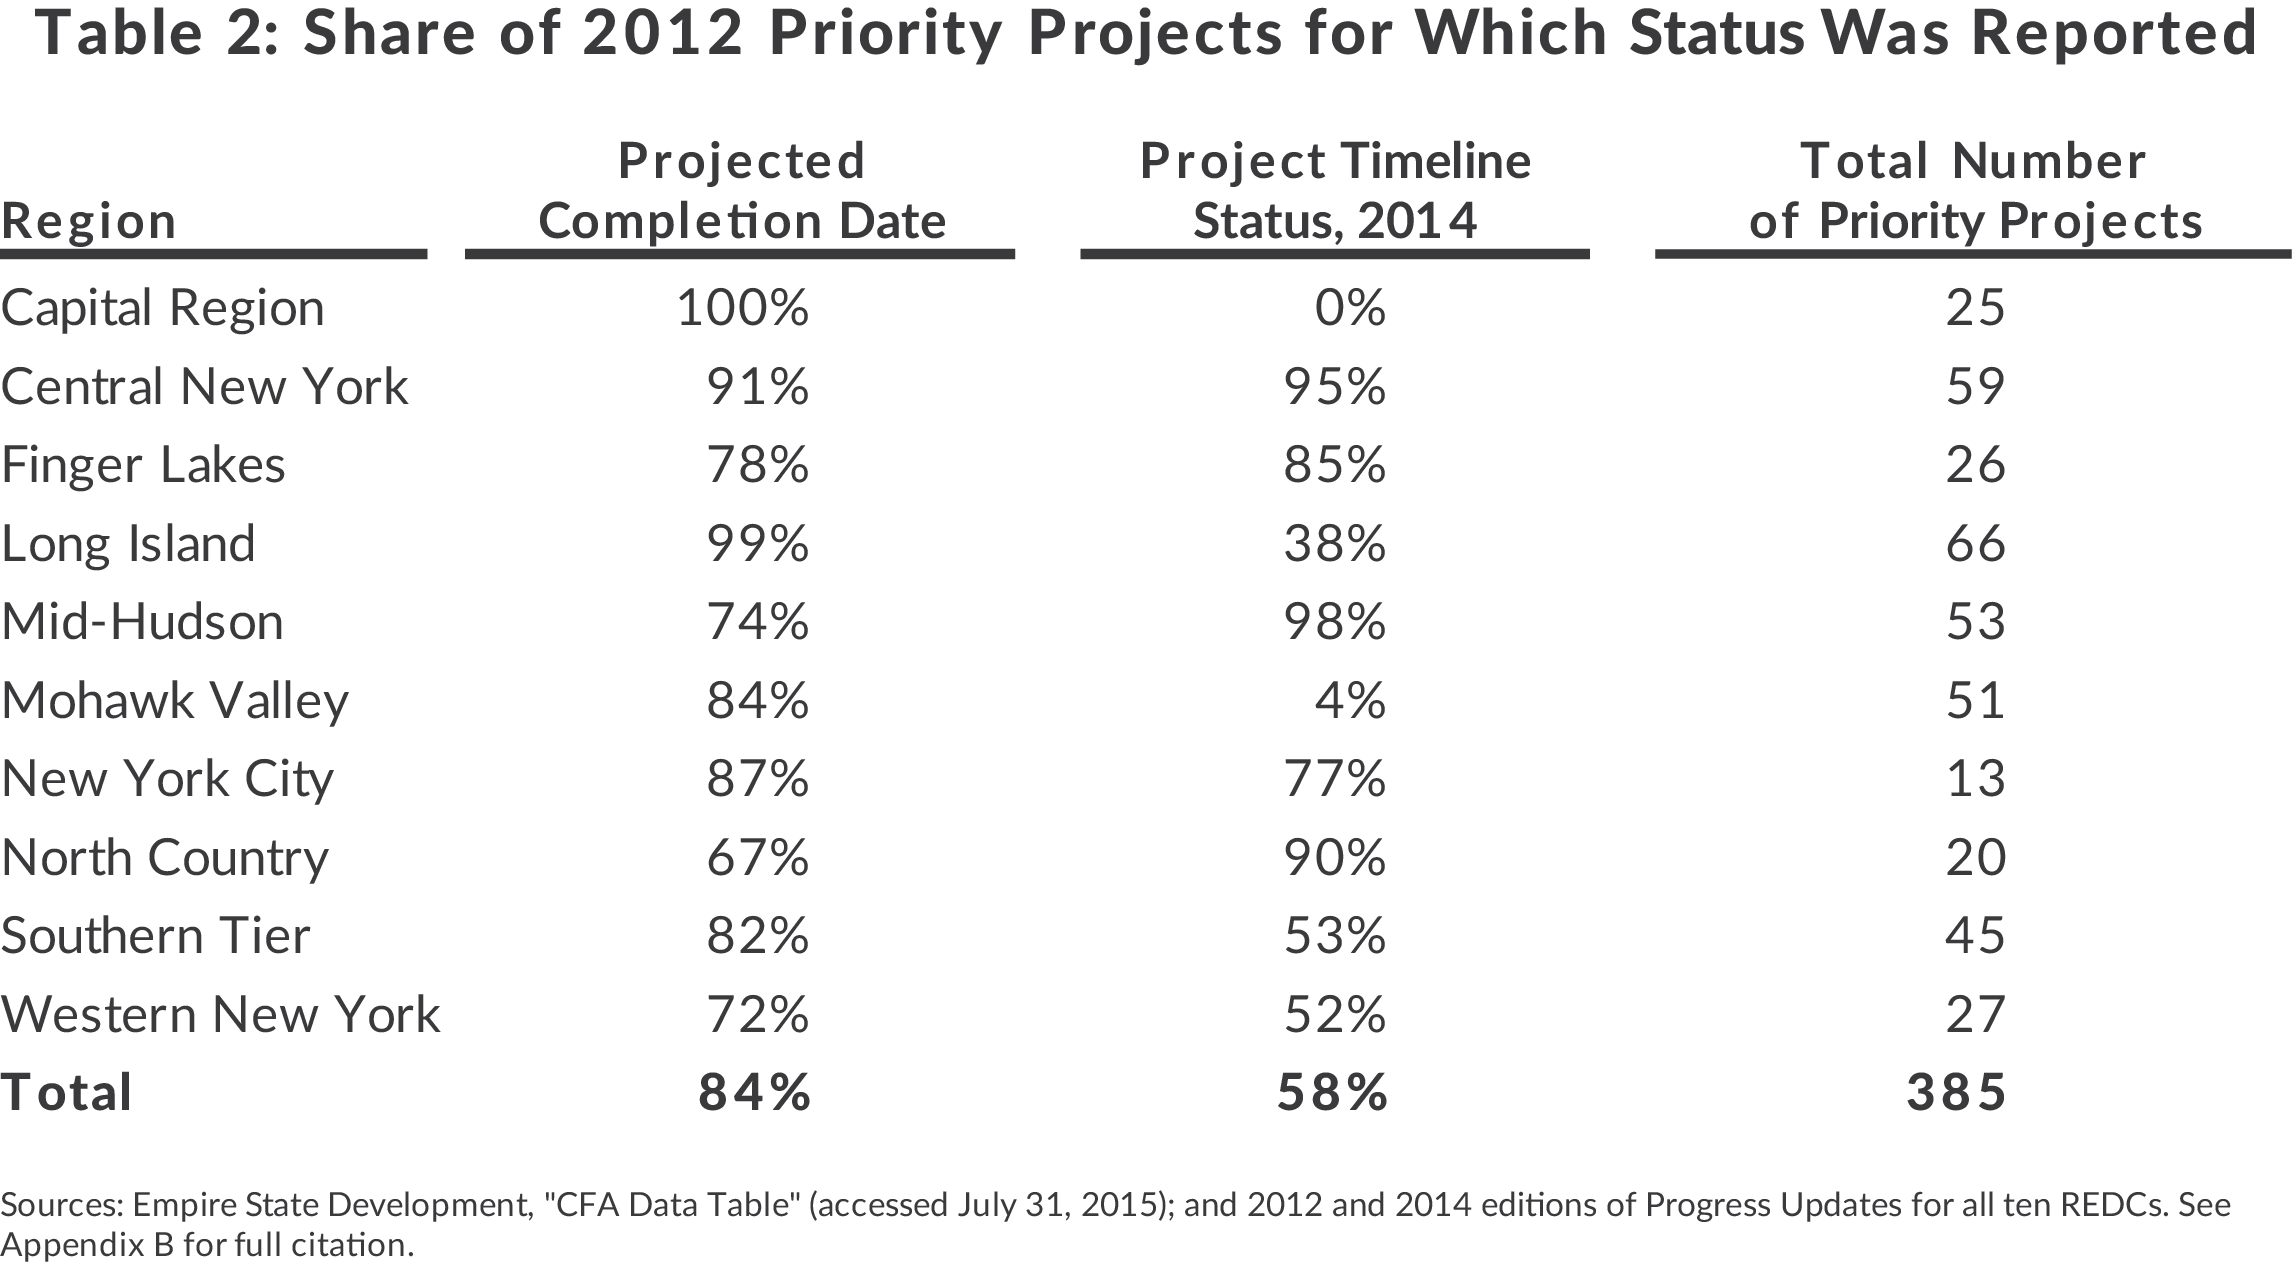 Table showing share of priority projects with state reports by Regional Economic Development Council